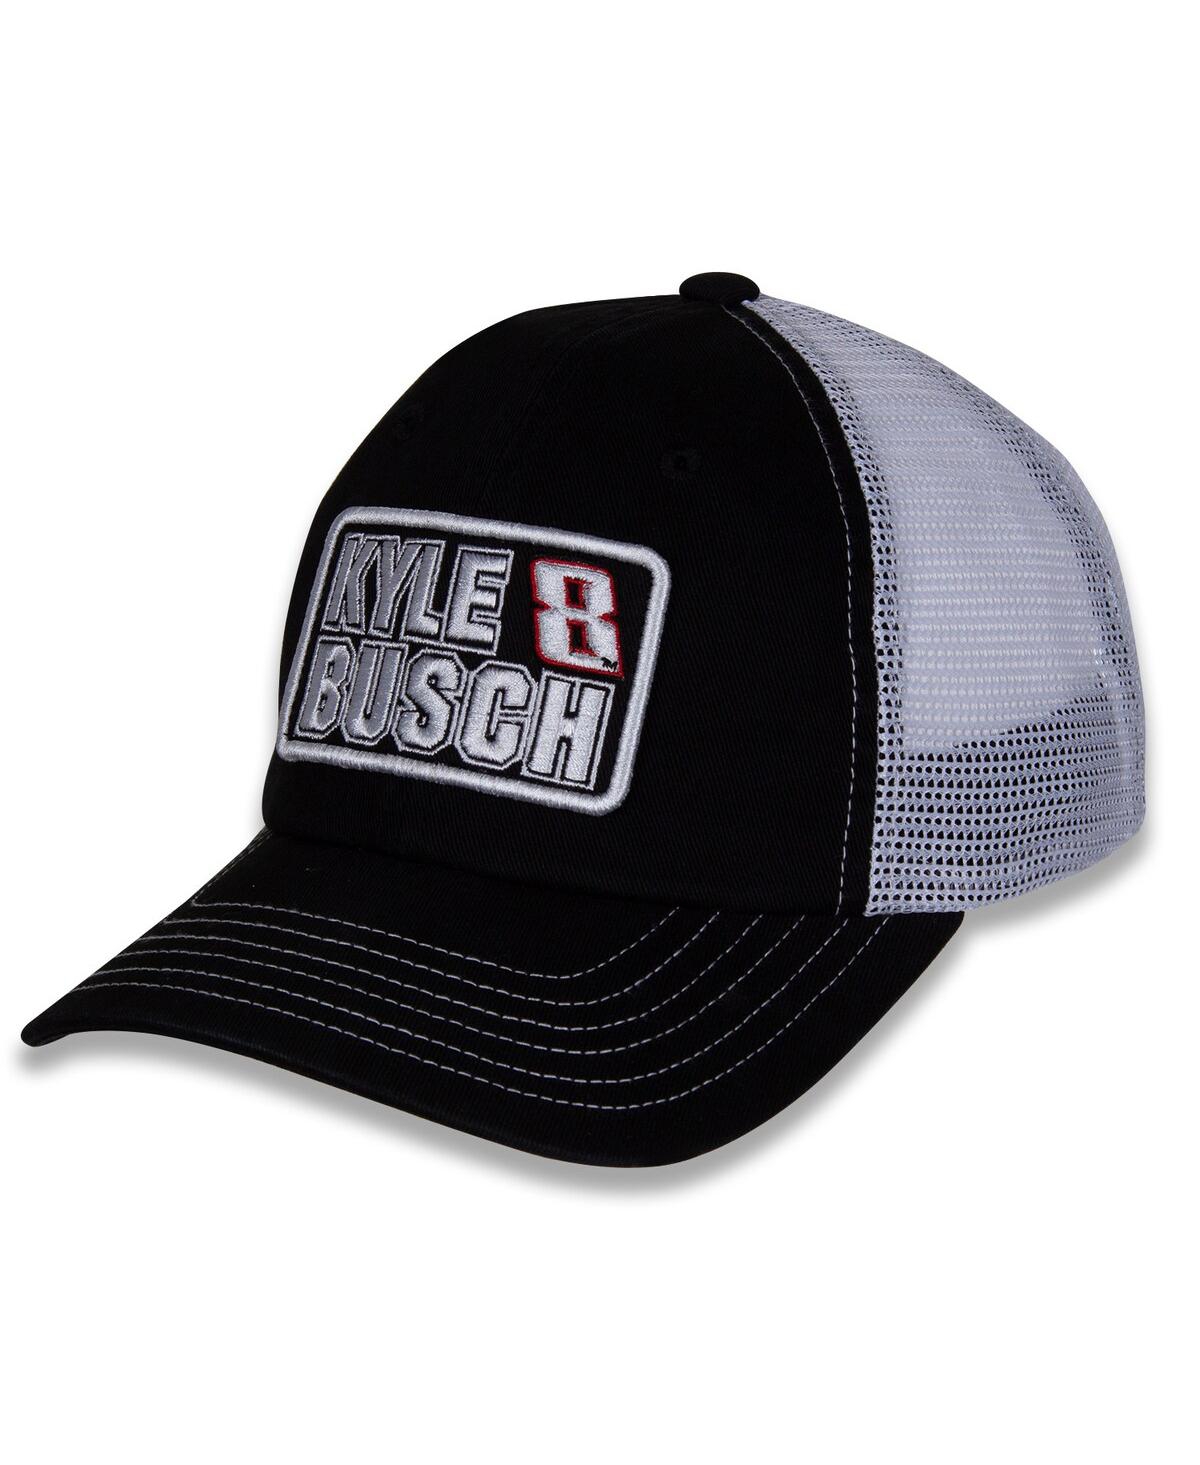 Women's Checkered Flag Sports Black, White Kyle Busch Name and Number Patch Adjustable Hat - Black, White